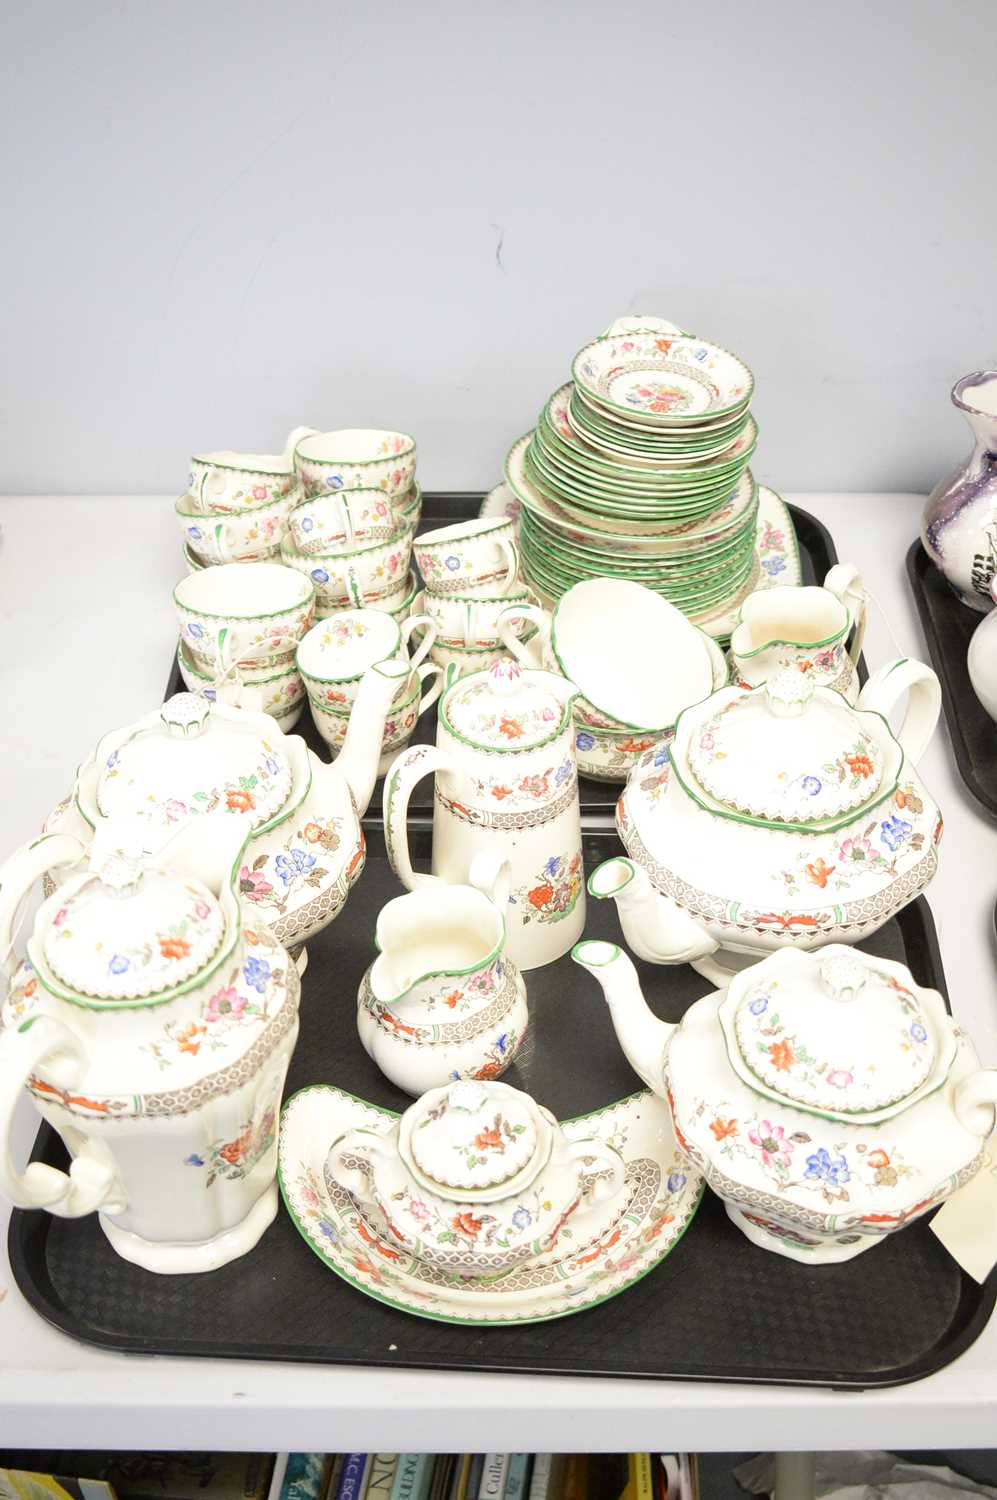 Lot 349 - Quantity of Copeland Spode 'Chinese Rose' pattern earthenware.